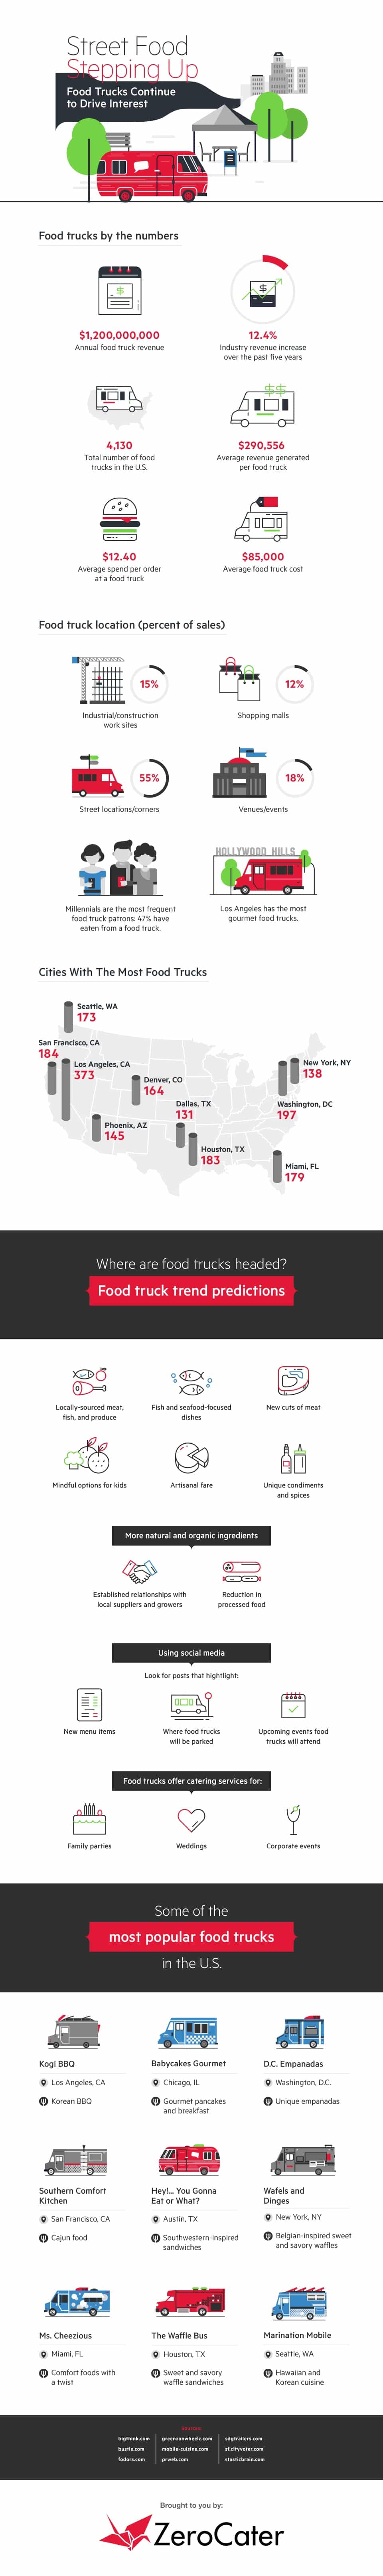 street-food-stepping-up-food-trucks-continue-to-drive-interest-infographics